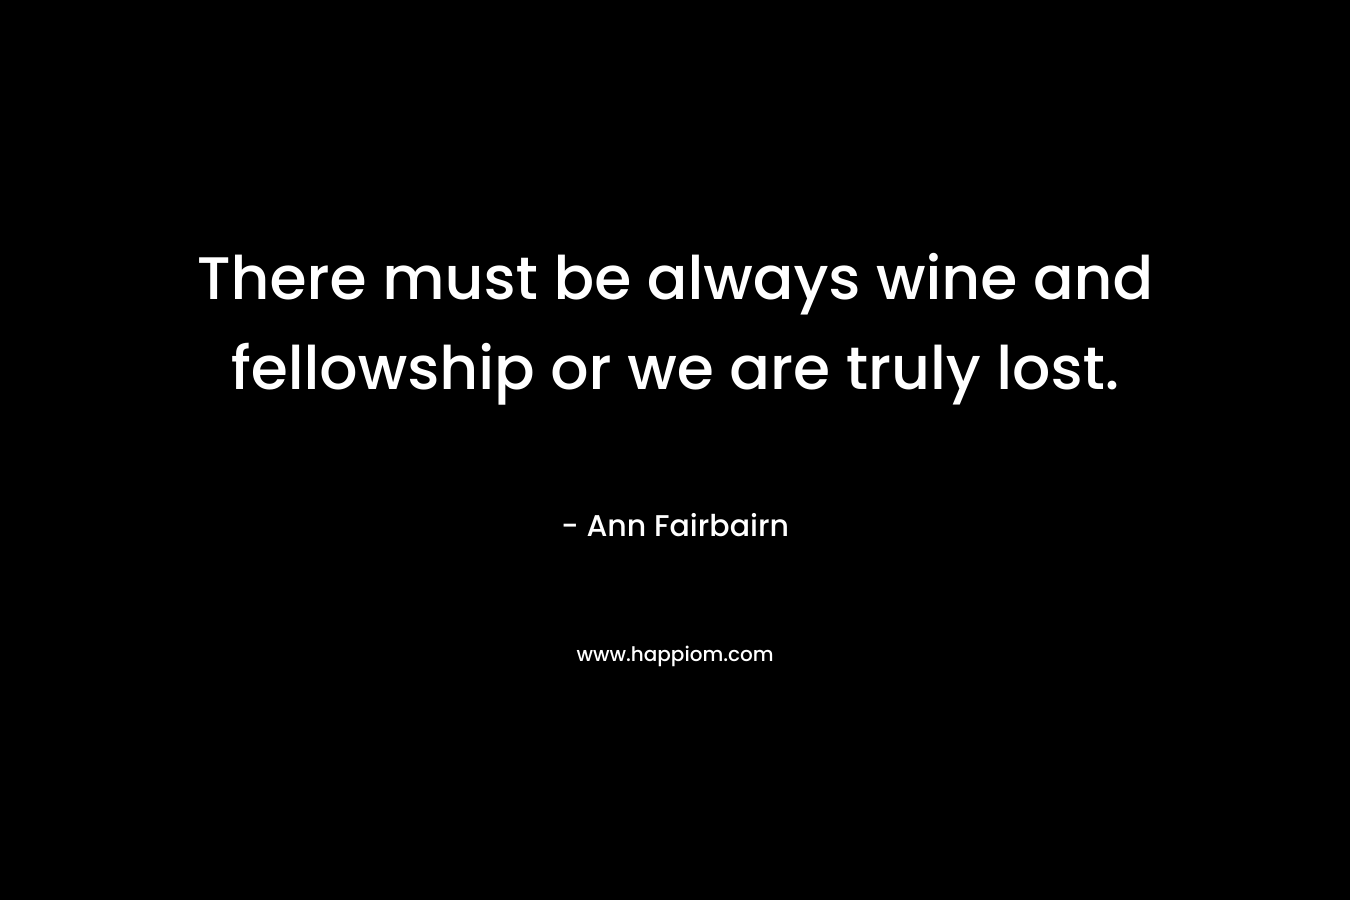 There must be always wine and fellowship or we are truly lost. – Ann Fairbairn